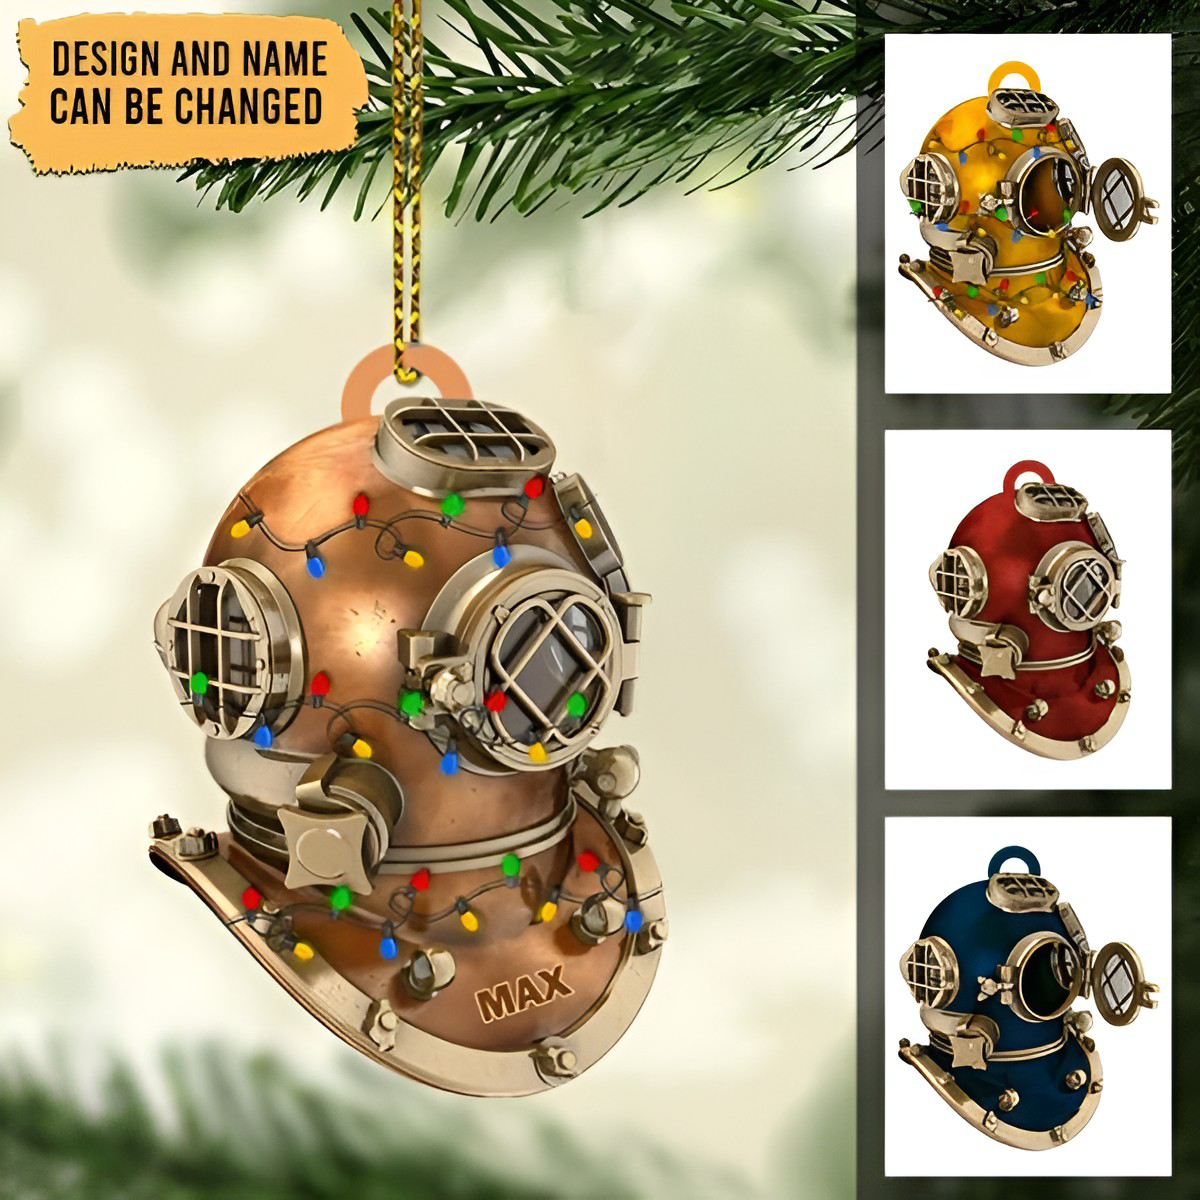 Scuba Diving Helmet Personalized Ornament Christmas Gift For Diving Lover